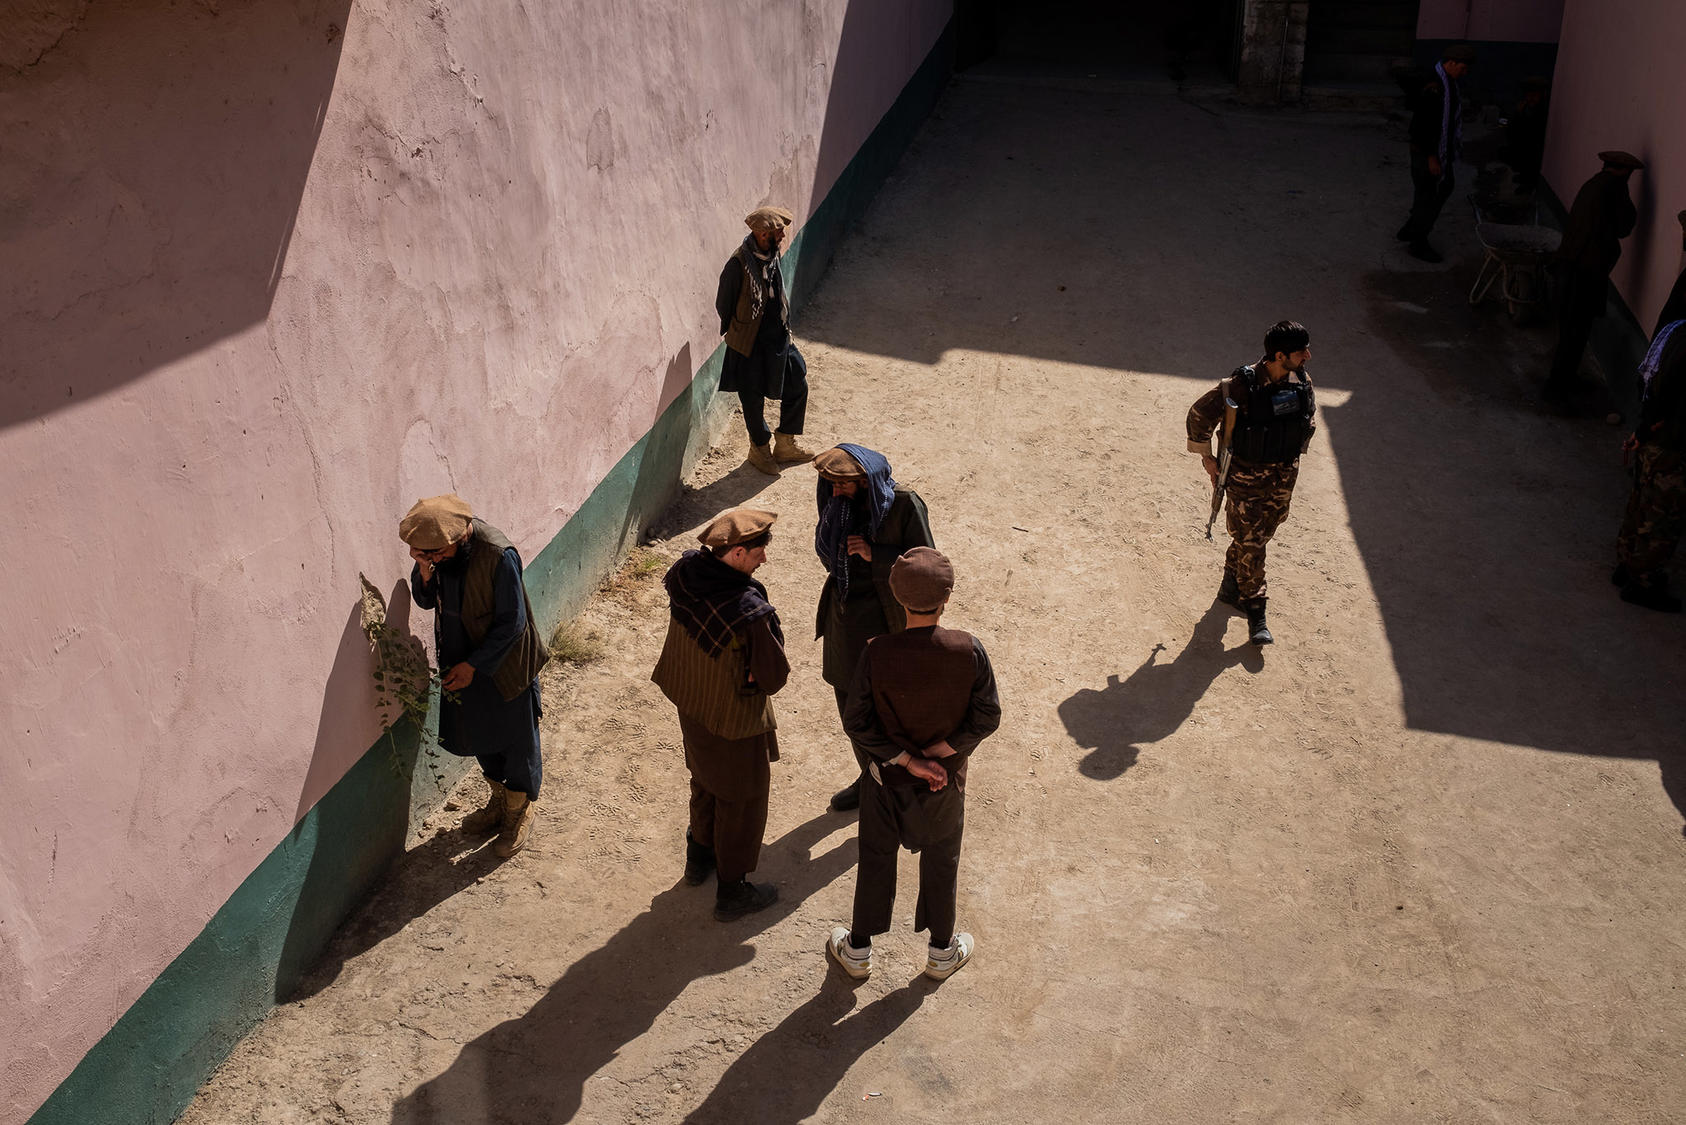 A soldier walks among a group of alleged Taliban fighters at a National Directorate of Security facility in Faizabad in September 2019. The status of prisoners will be a critical issue in future negotiations with the Taliban. (Jim Huylebroek/New York Times)